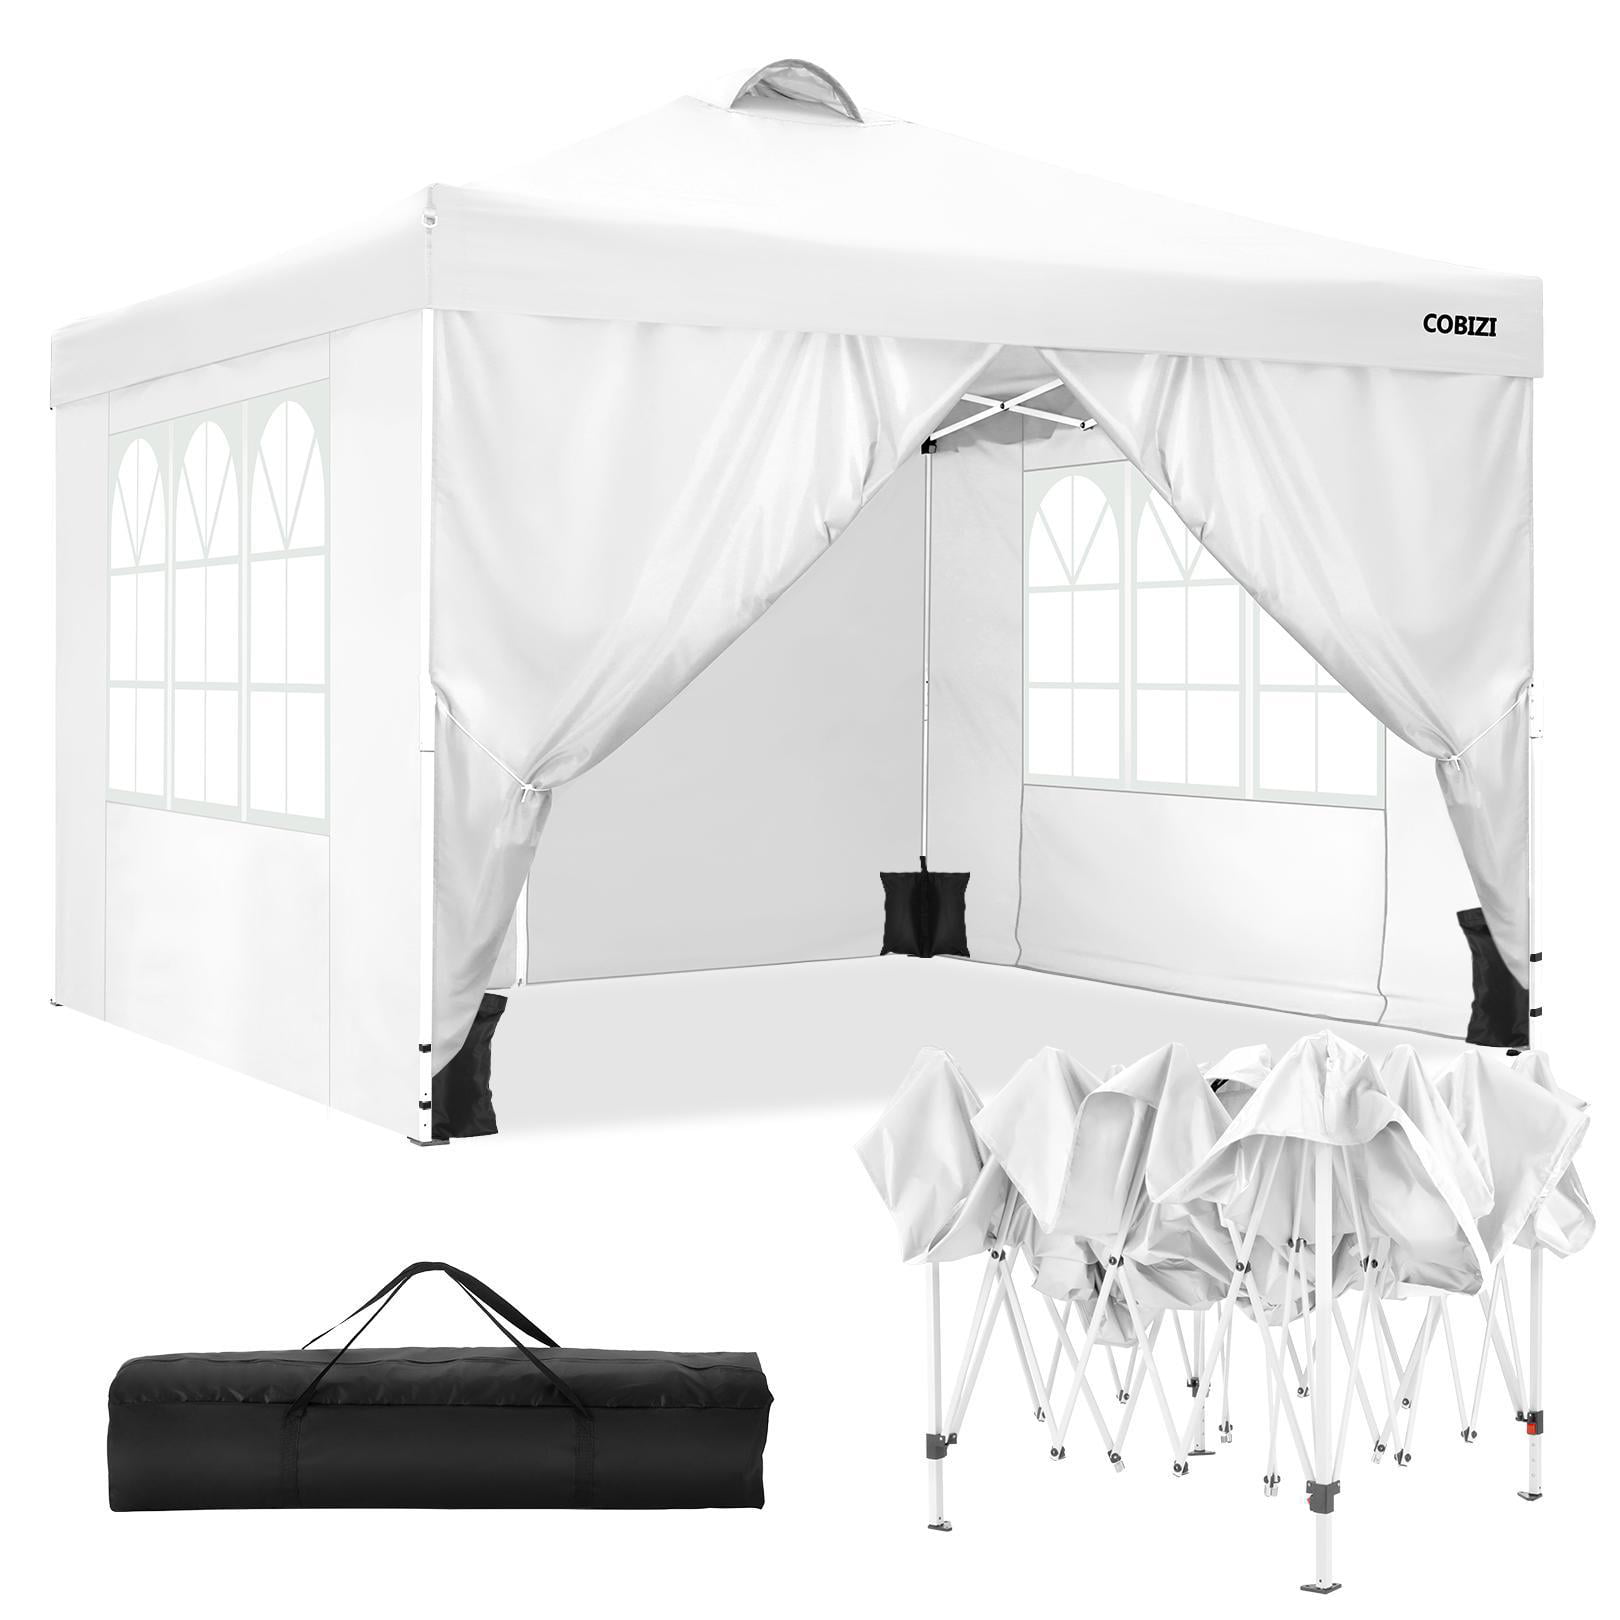 Green 3x4 Metres Gazebo Waterproof Outdoor Tent Marquee Awning Canopy 4 Side Walls 3 with Windows 1 Door with Zip Easy Assemble and Remove